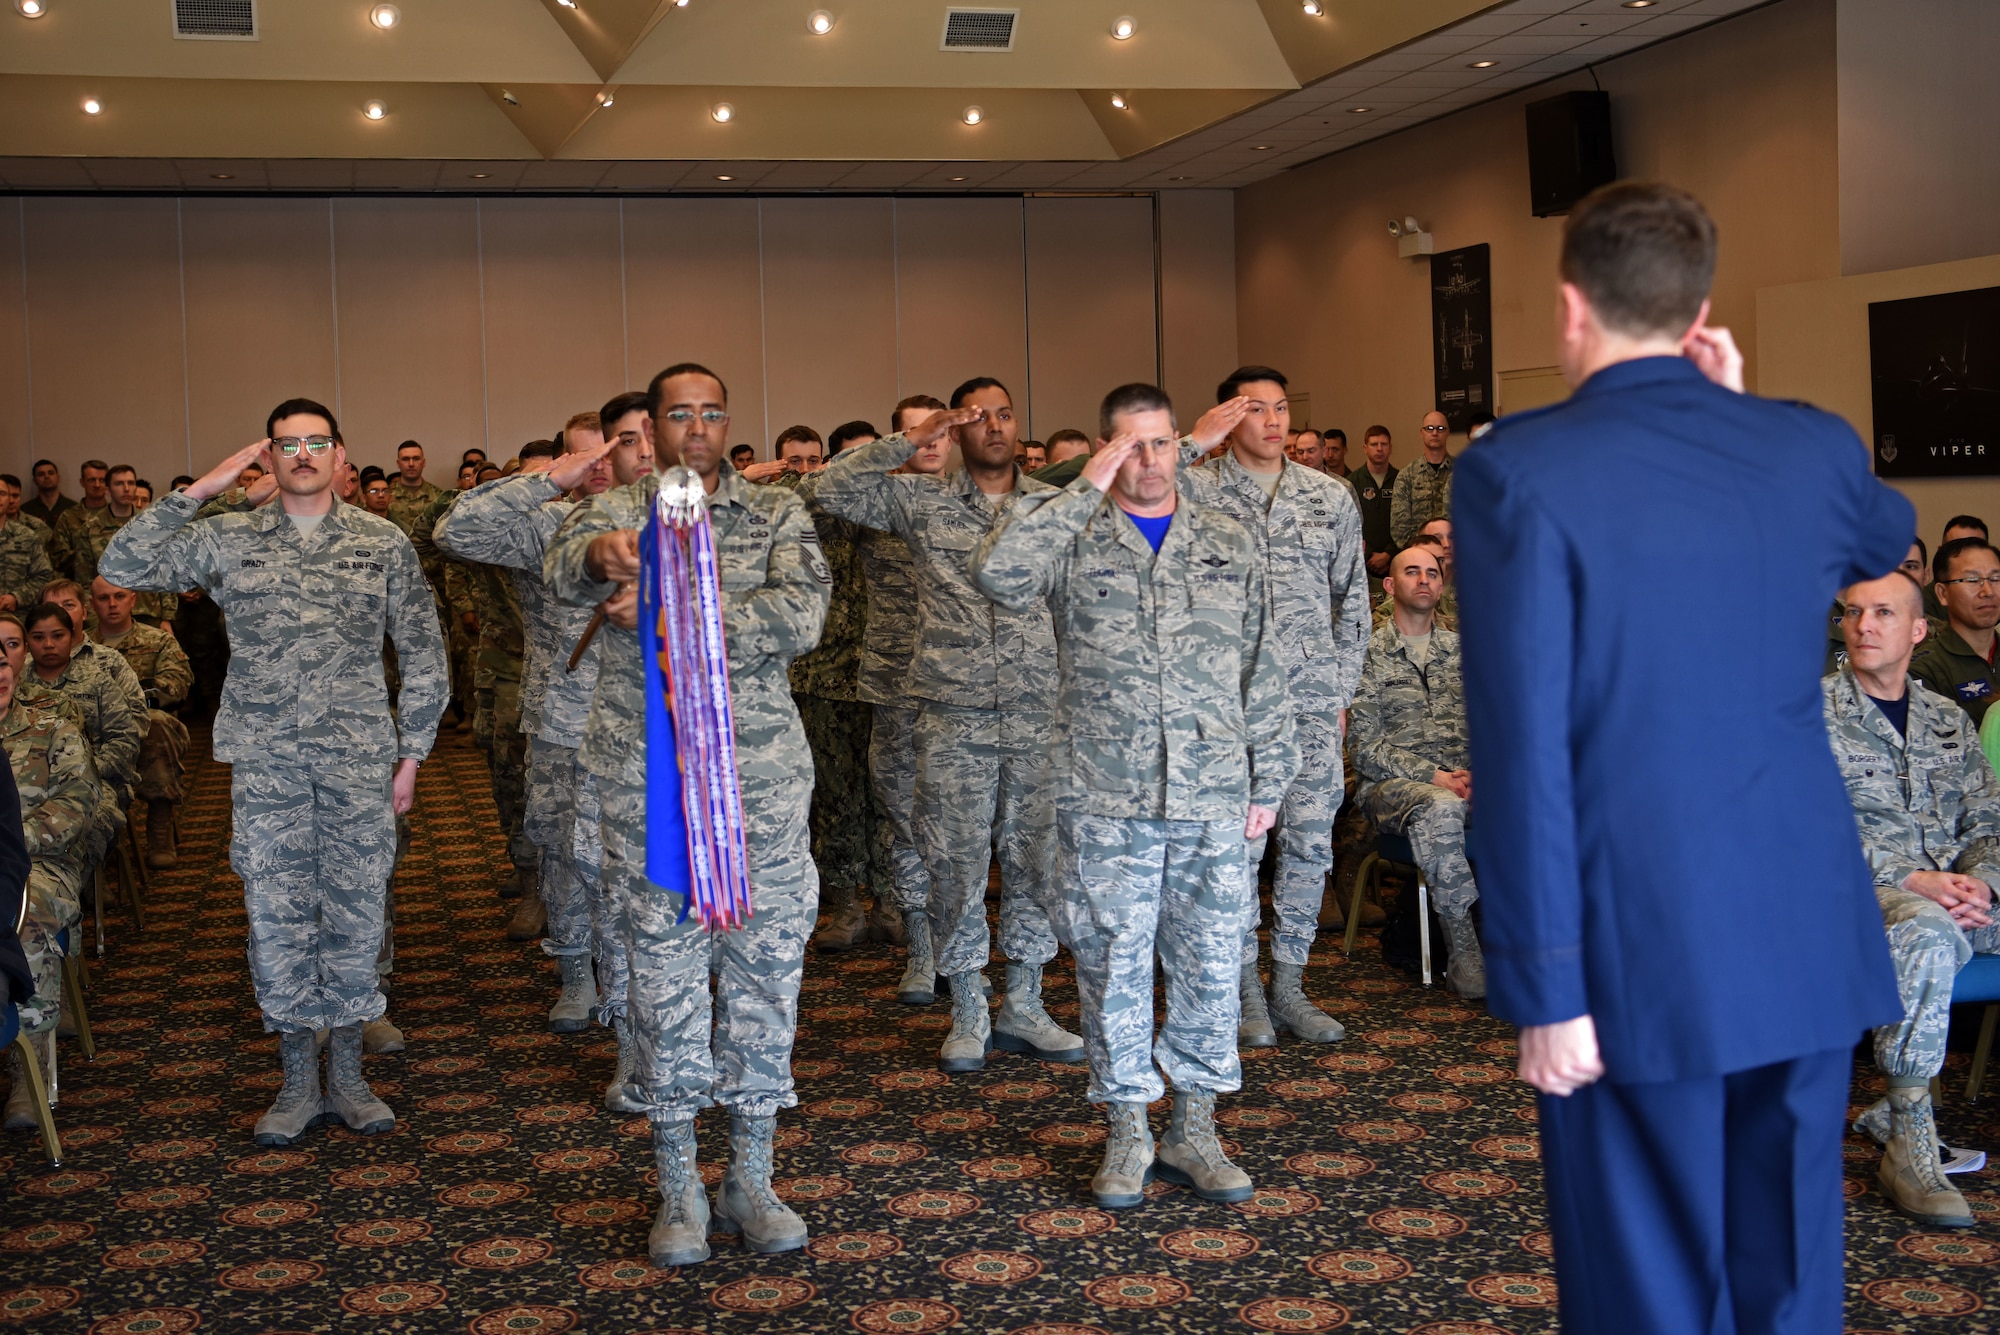 Members of the 607th Air Operations Center render a first salute to their new commander, U.S. Air Force Col. Christopher Russell, during his assumption of command ceremony at Osan Air Base, Republic of Korea, April 5, 2019. Russell assumed commander of the most-forward deployed AOC in the world. The 607th’s mission is to plan, command and control, execute and assess air, space and information operations to meet Secretary of Defense, Pacific Air Force Forces and USFK taskings across the spectrum of military operations. (U.S. Air Force photo by Staff Sgt. Kelsey Tucker)